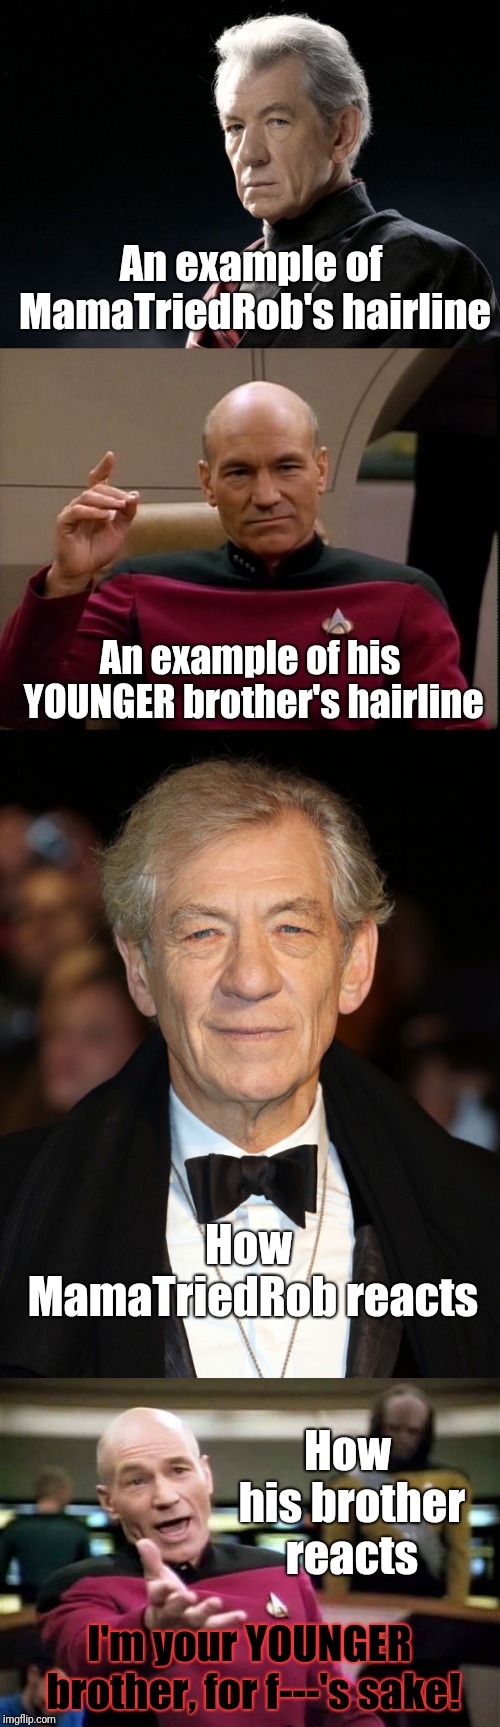 Guess it was all those noogies I gave him when we were little. | An example of MamaTriedRob's hairline; An example of his YOUNGER brother's hairline; How MamaTriedRob reacts; How his brother reacts; I'm your YOUNGER brother, for f---'s sake! | image tagged in magnetomeme,picard make it so,picard wtf,ian mckellen,brothers | made w/ Imgflip meme maker